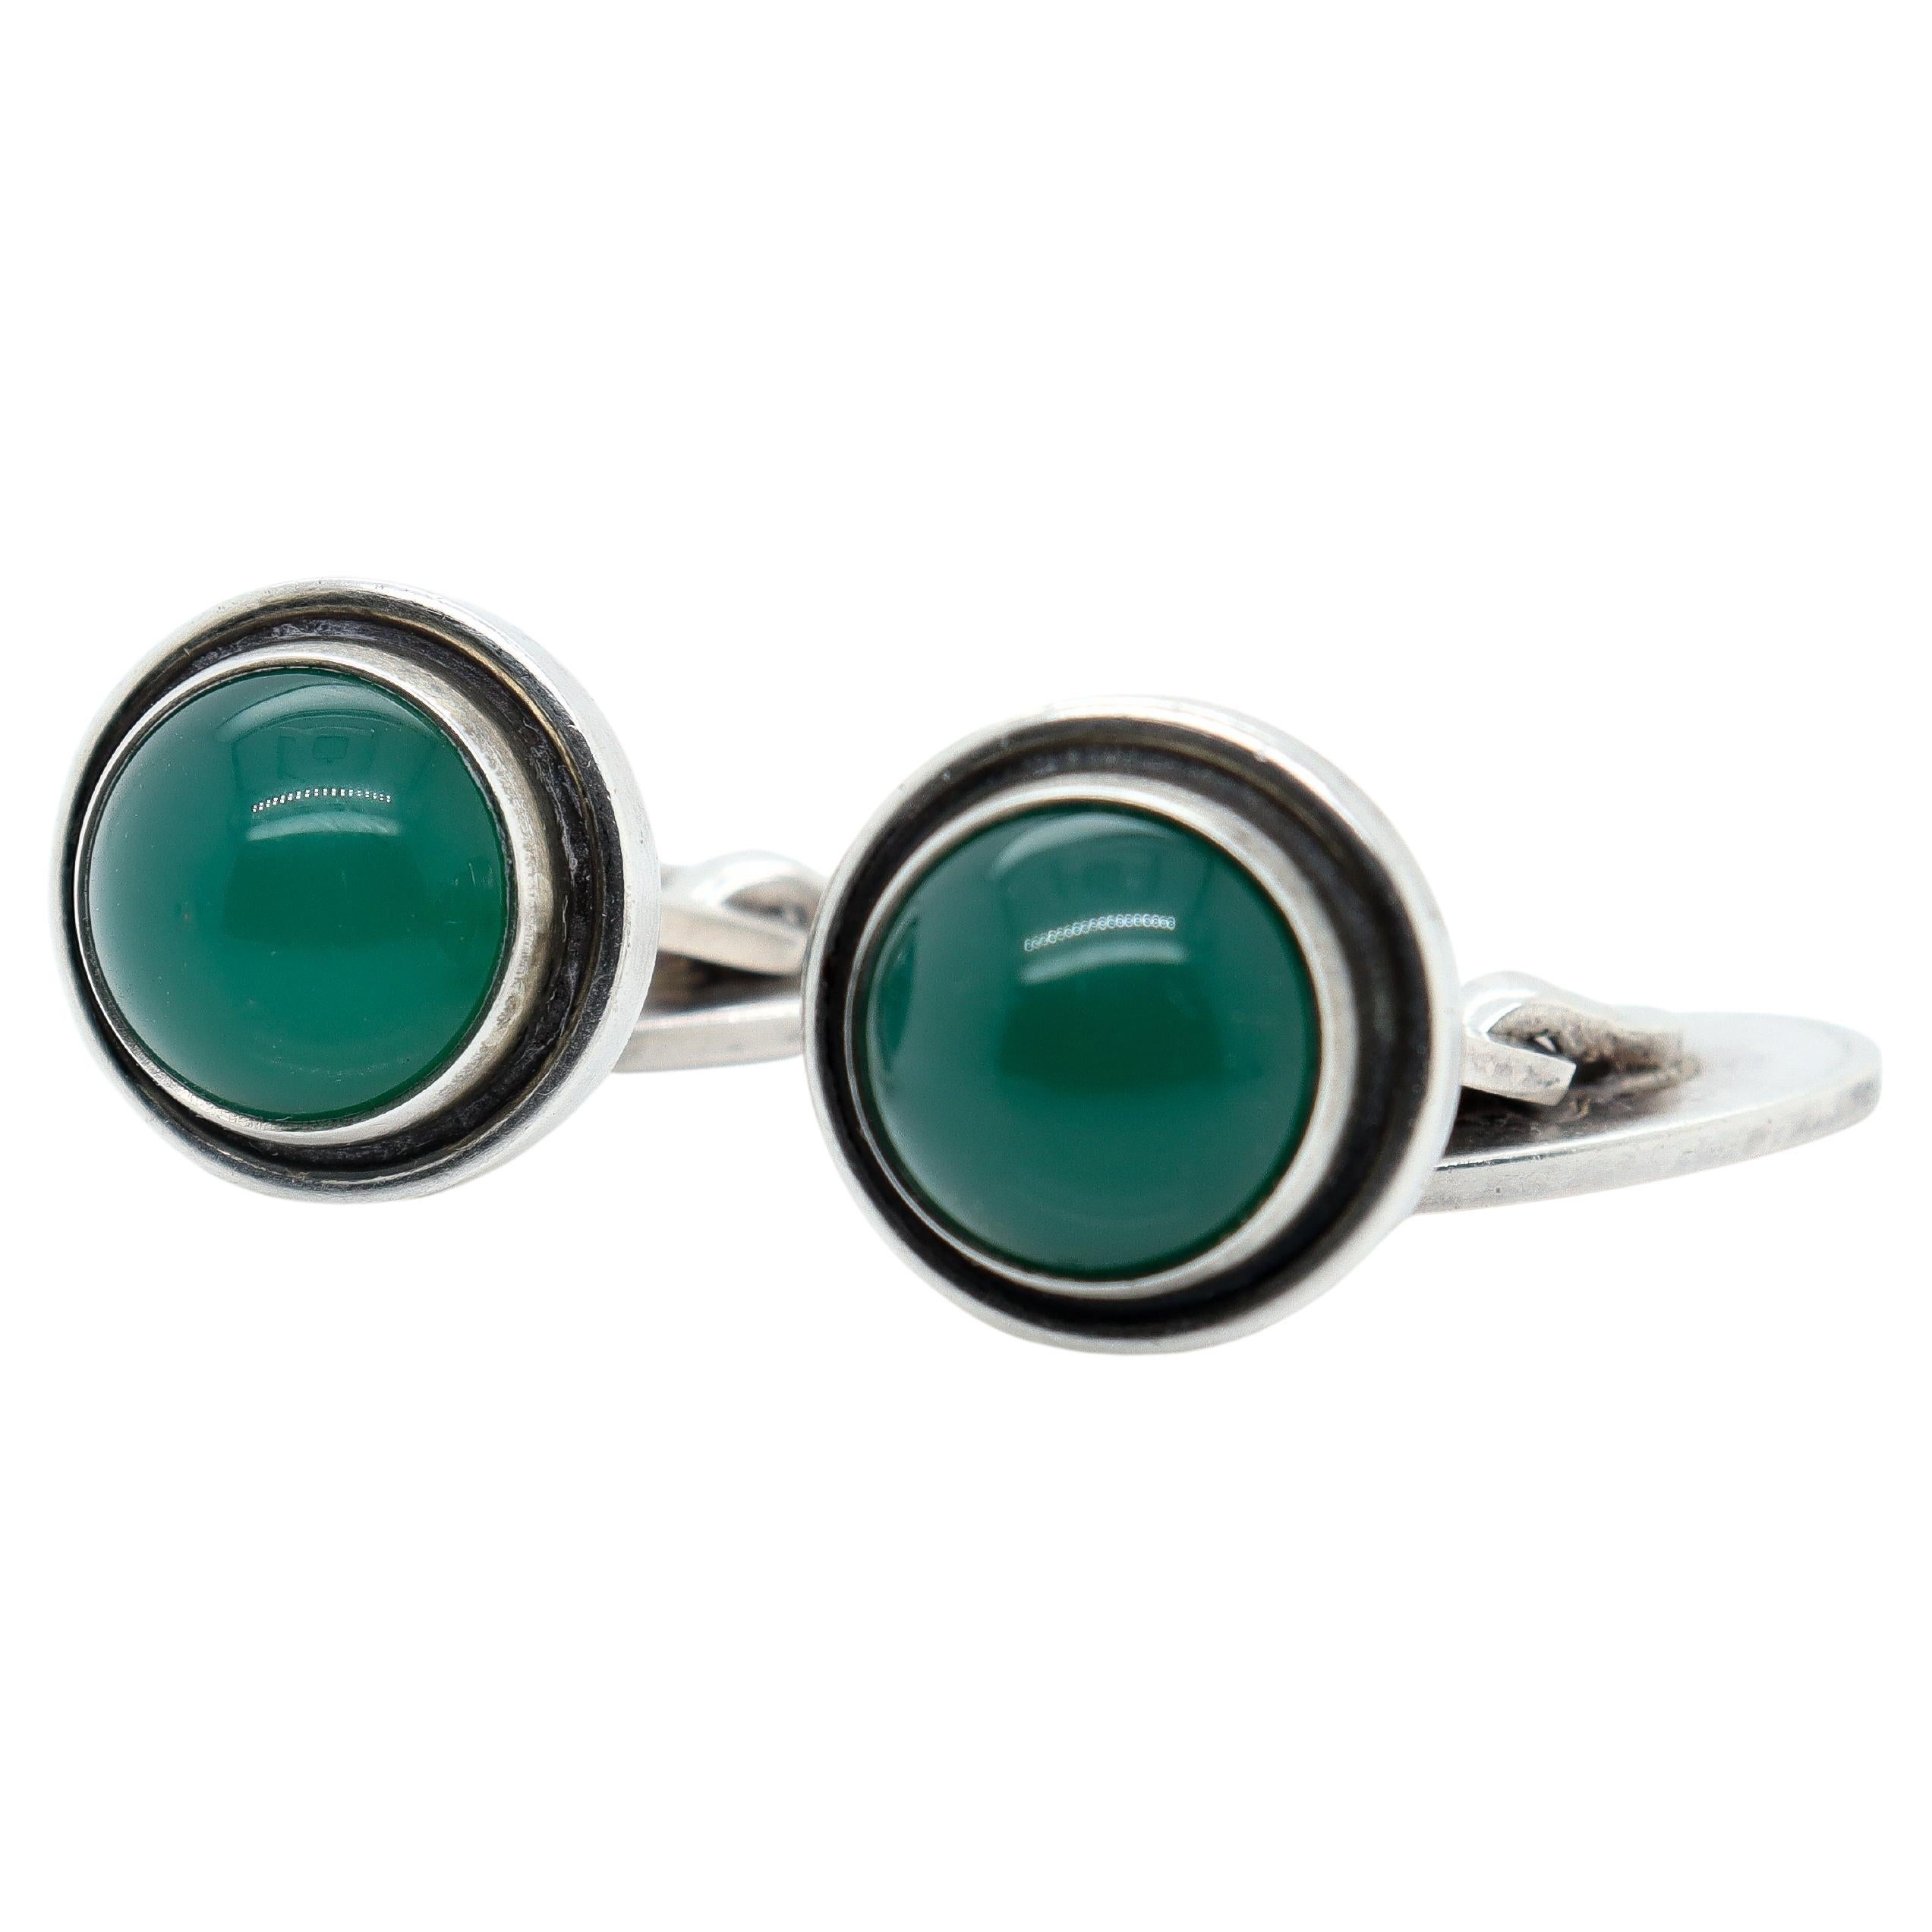 Georg Jensen Sterling Silver Cufflinks Model #44D with Chrysoprase Cabochons